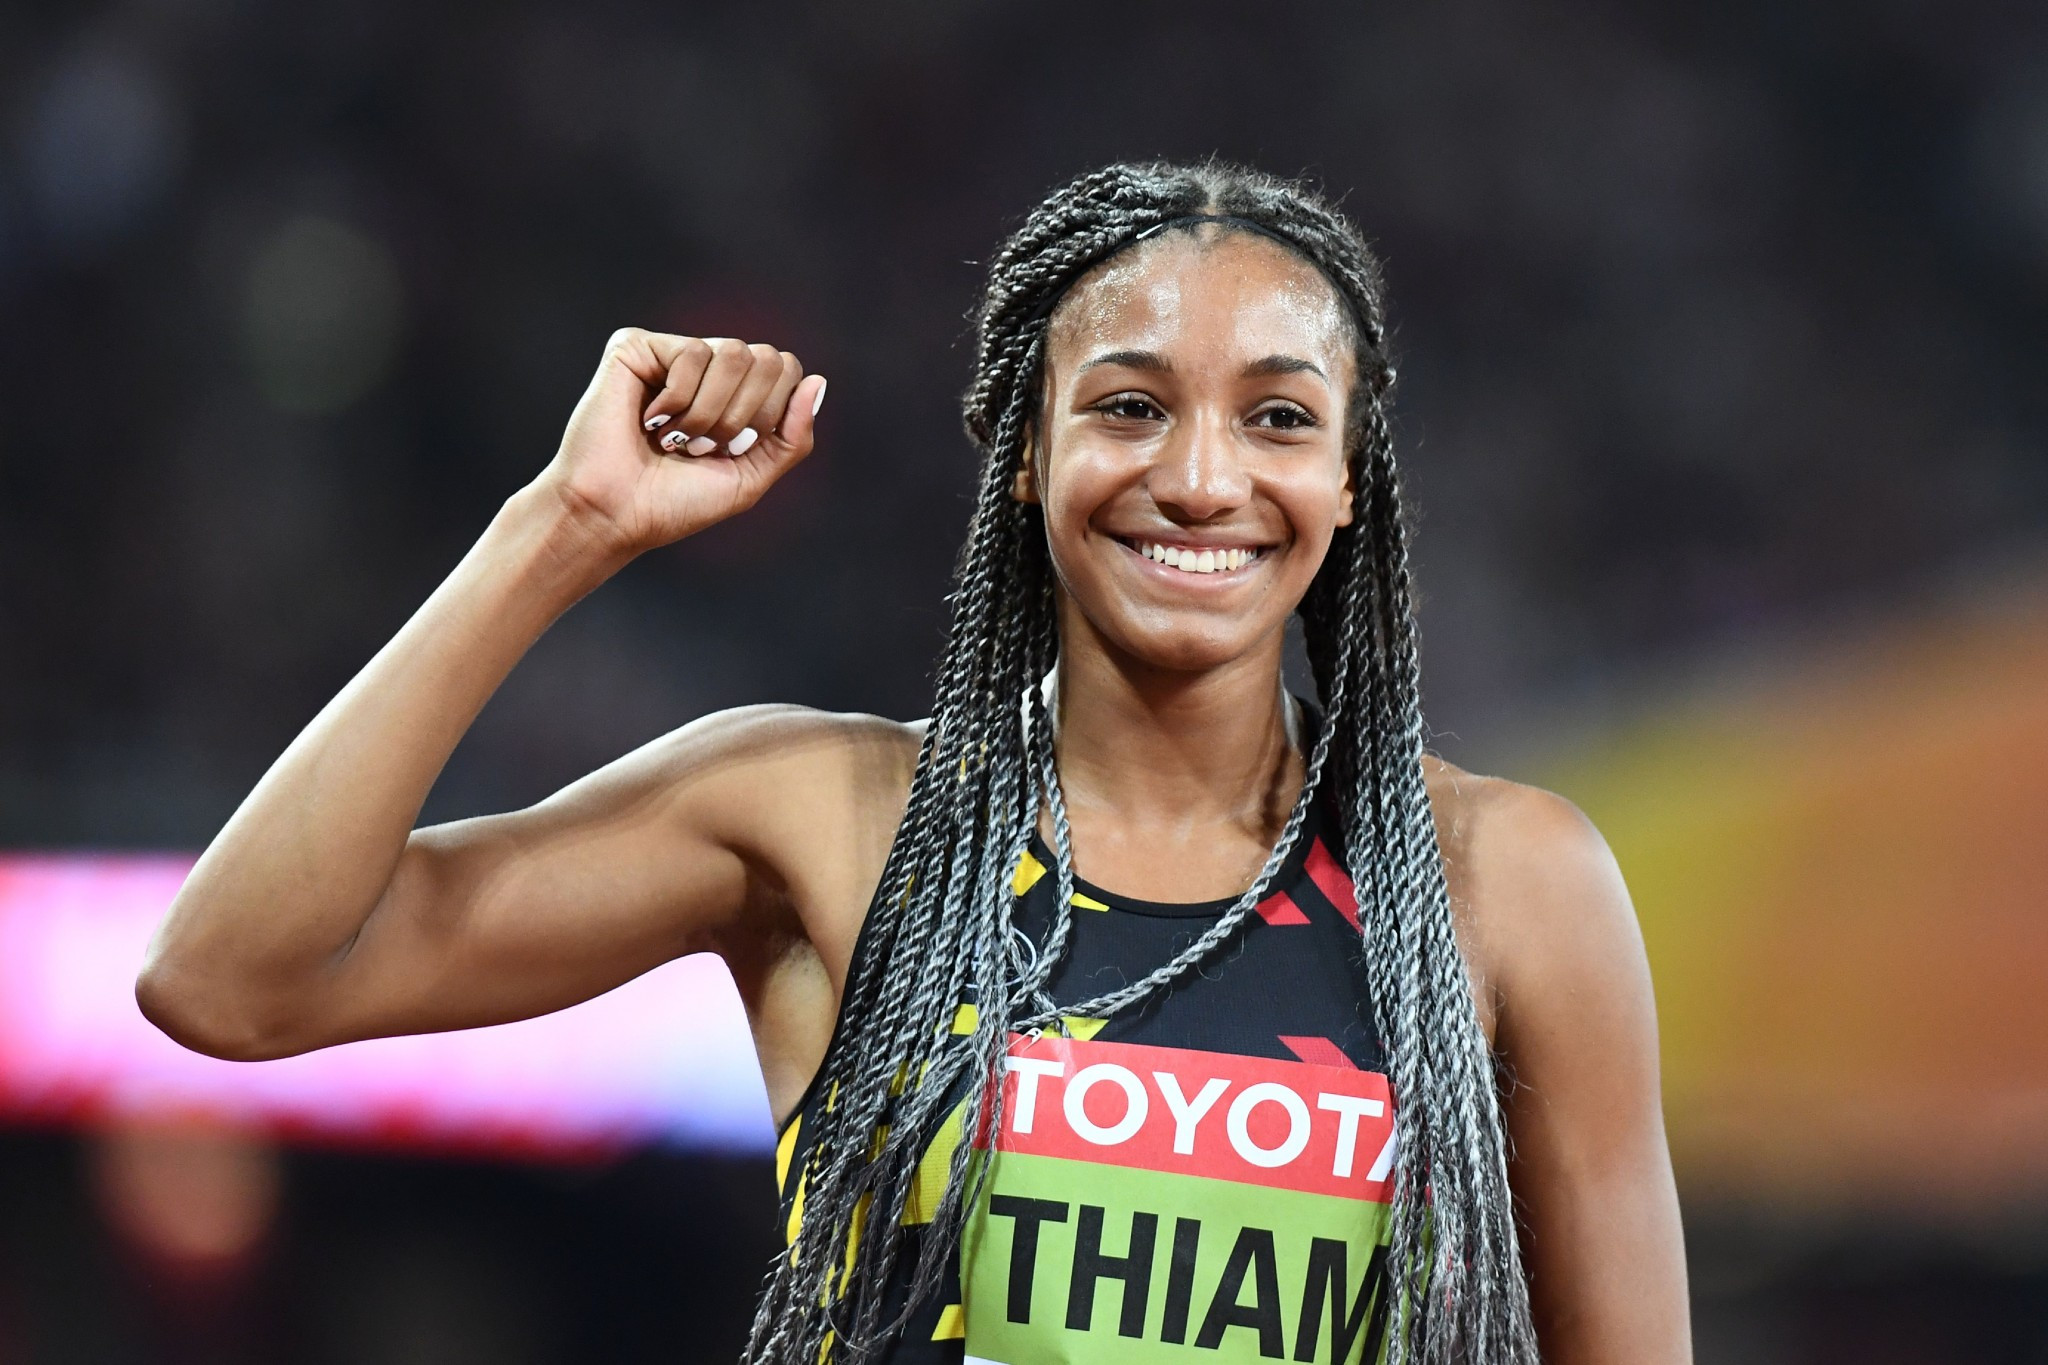 Nafissatou Thiam was too strong in the women's heptathlon ©Getty Images